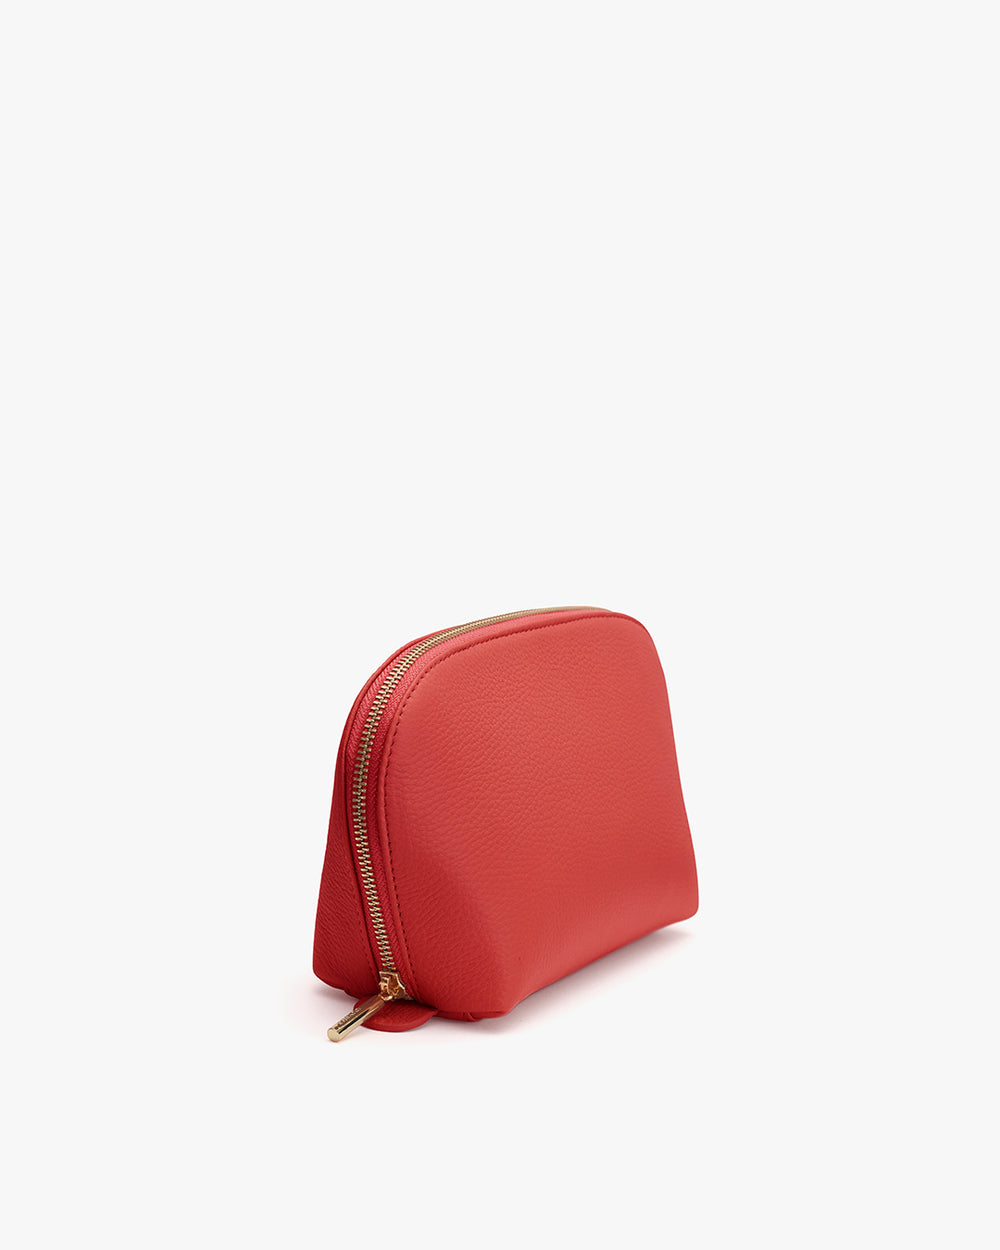 Small cosmetic bag with zipper on a plain background